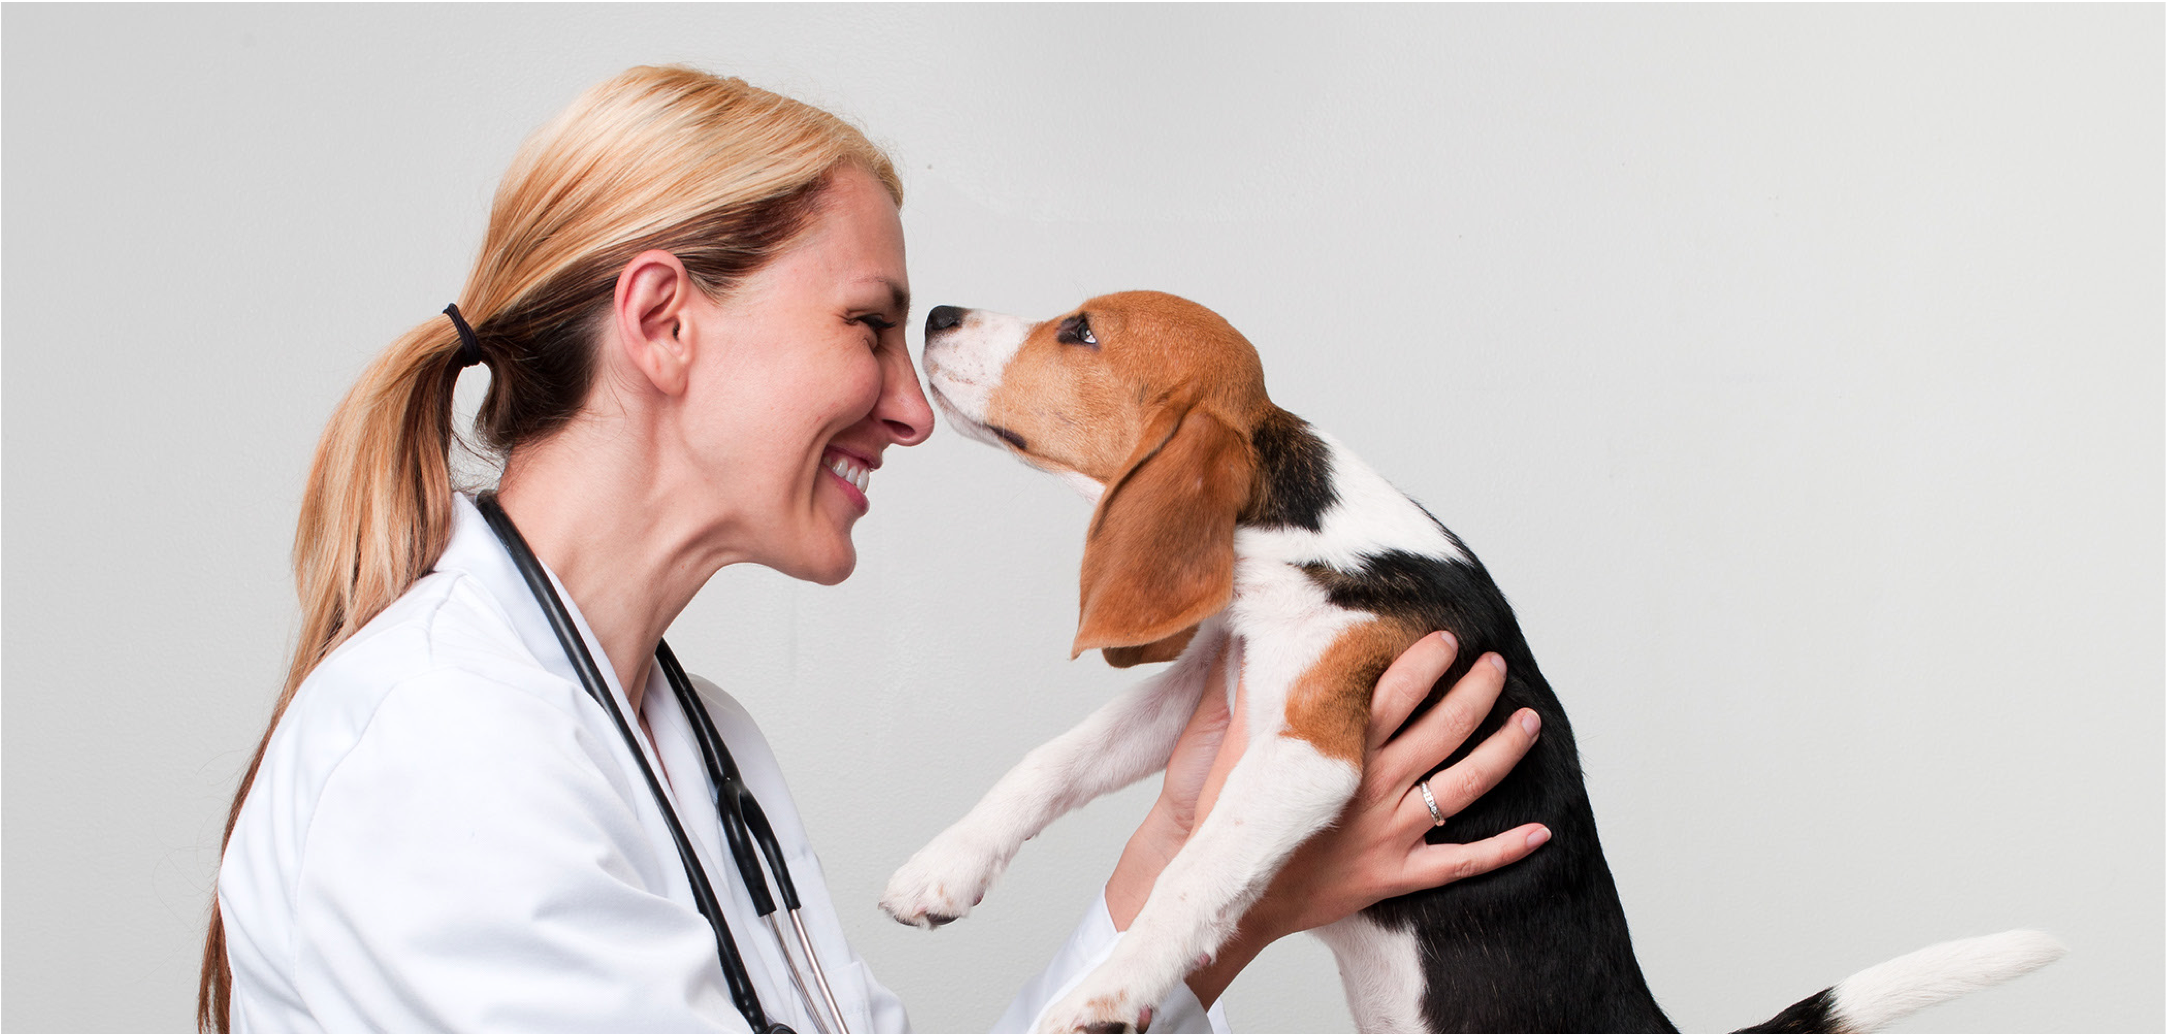 The impact of positive work environment in veterinary medicine